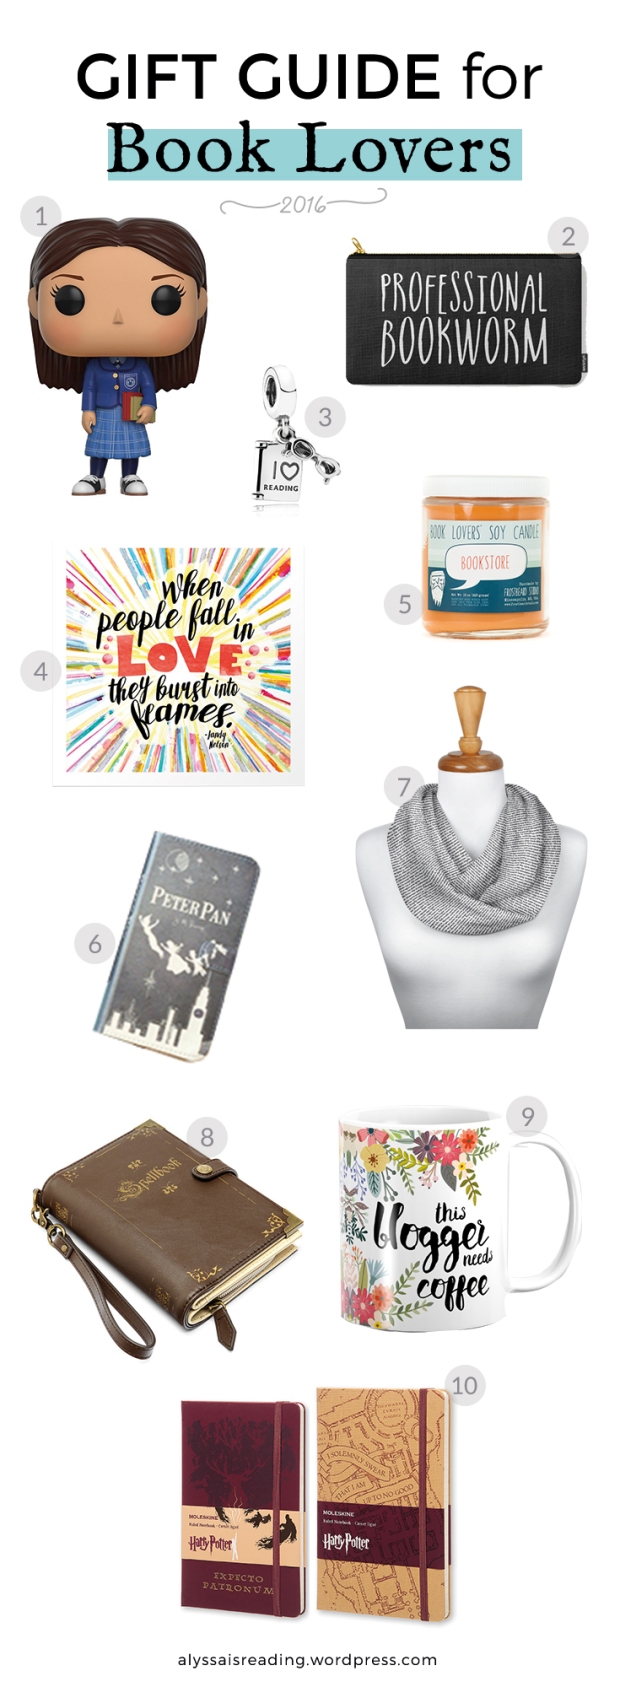 gift-guide-for-book-lovers-2016